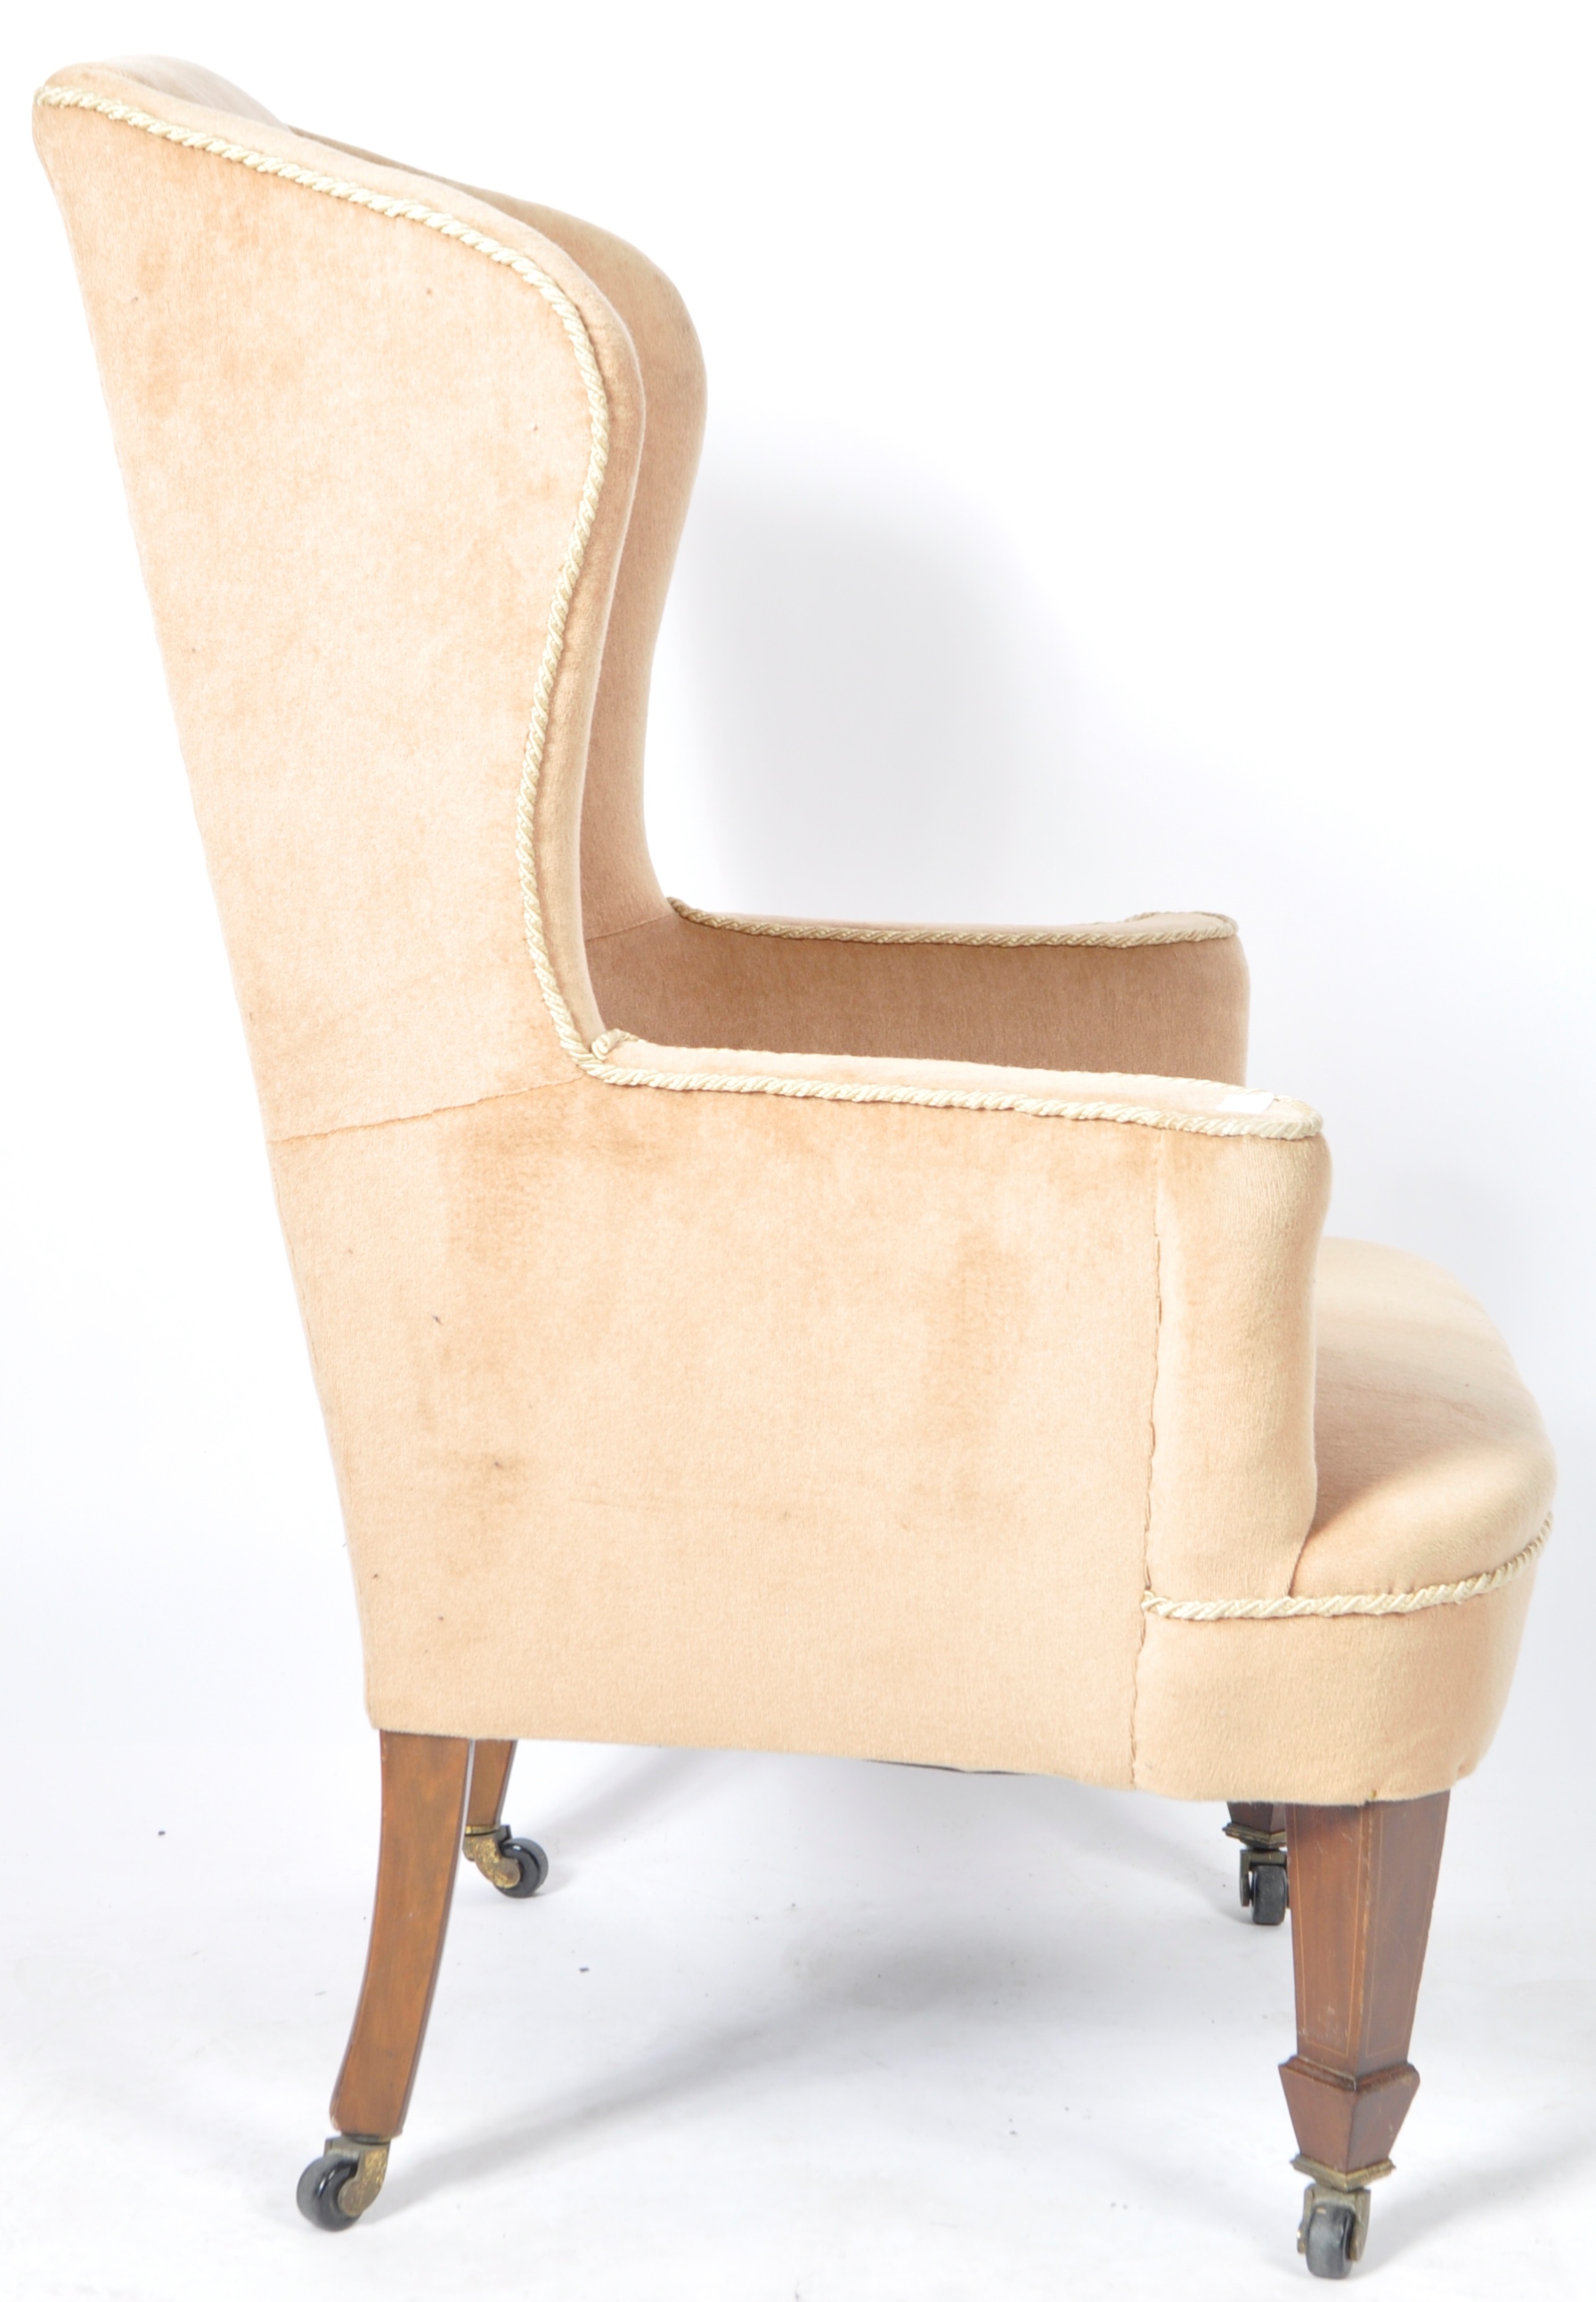 ANTIQUE 19TH CENTURY WINGBACK FIRESIDE ARMCHAIR - Image 5 of 7